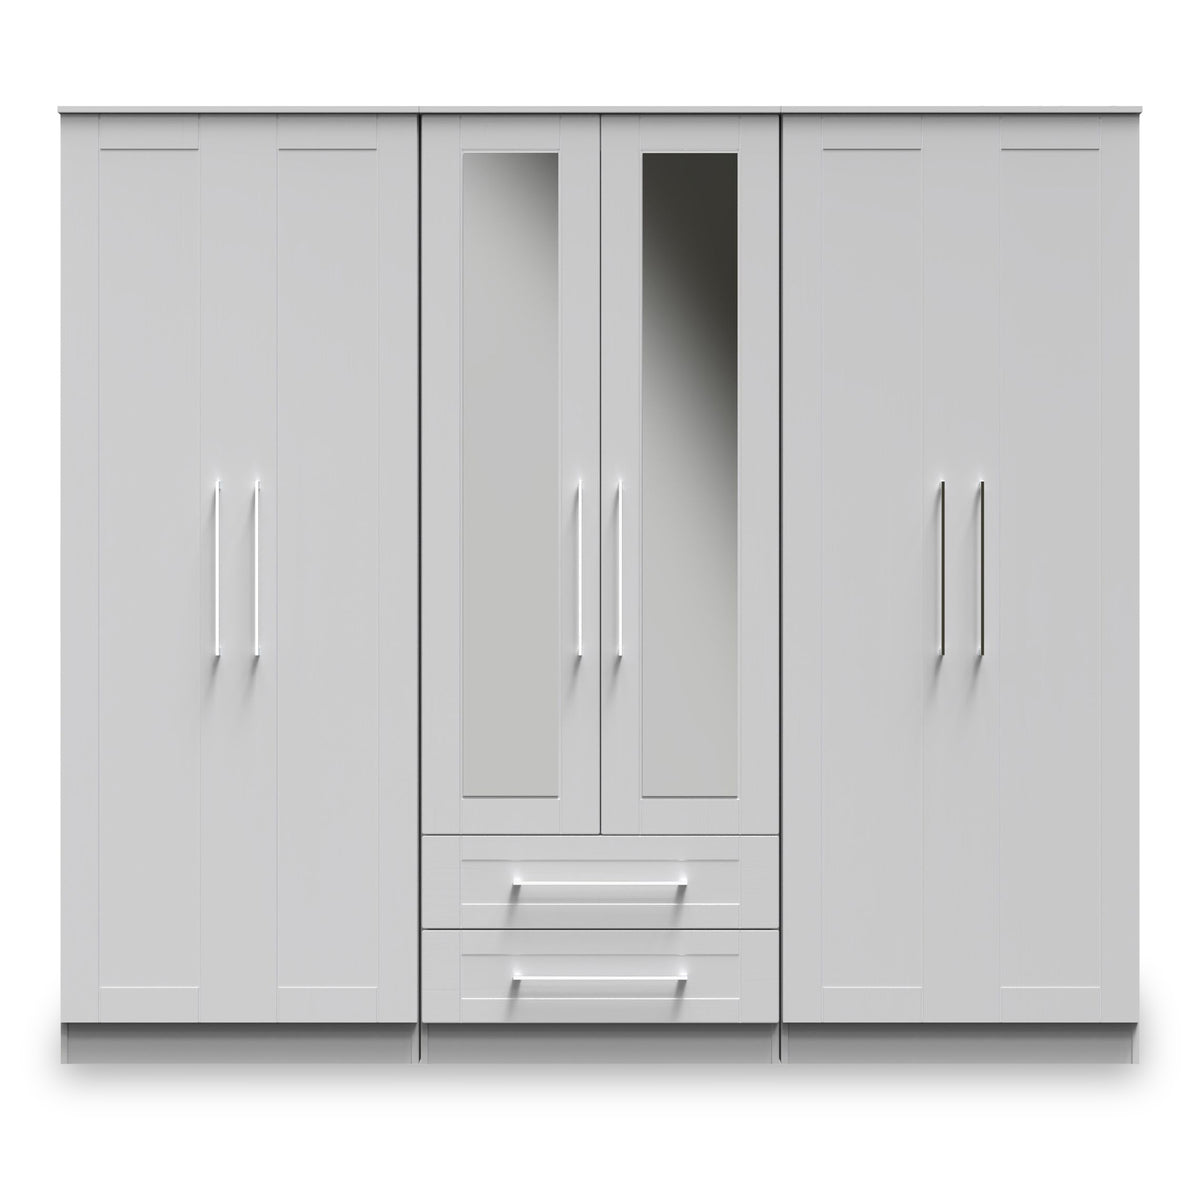 Bellamy Grey Tall 6 Door 2 Drawer with Mirrors Wardrobe by Roseland